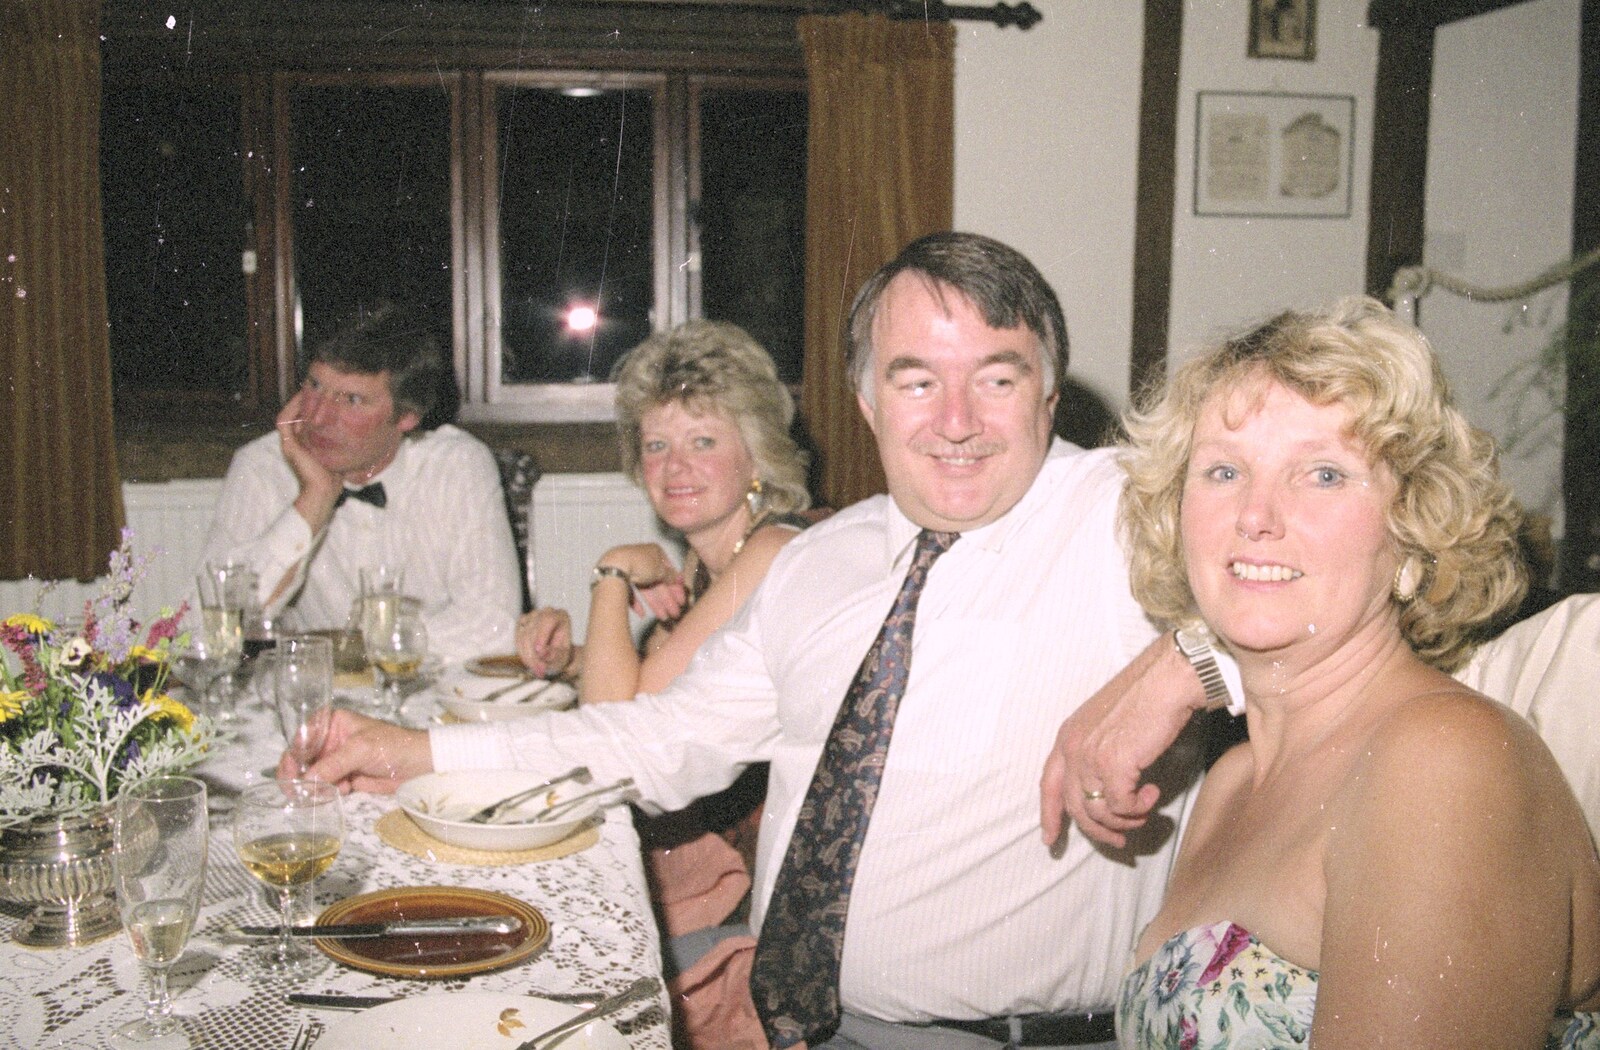 Corky and Elteb from Nosher's Dinner Party, Stuston, Suffolk - 14th September 1991